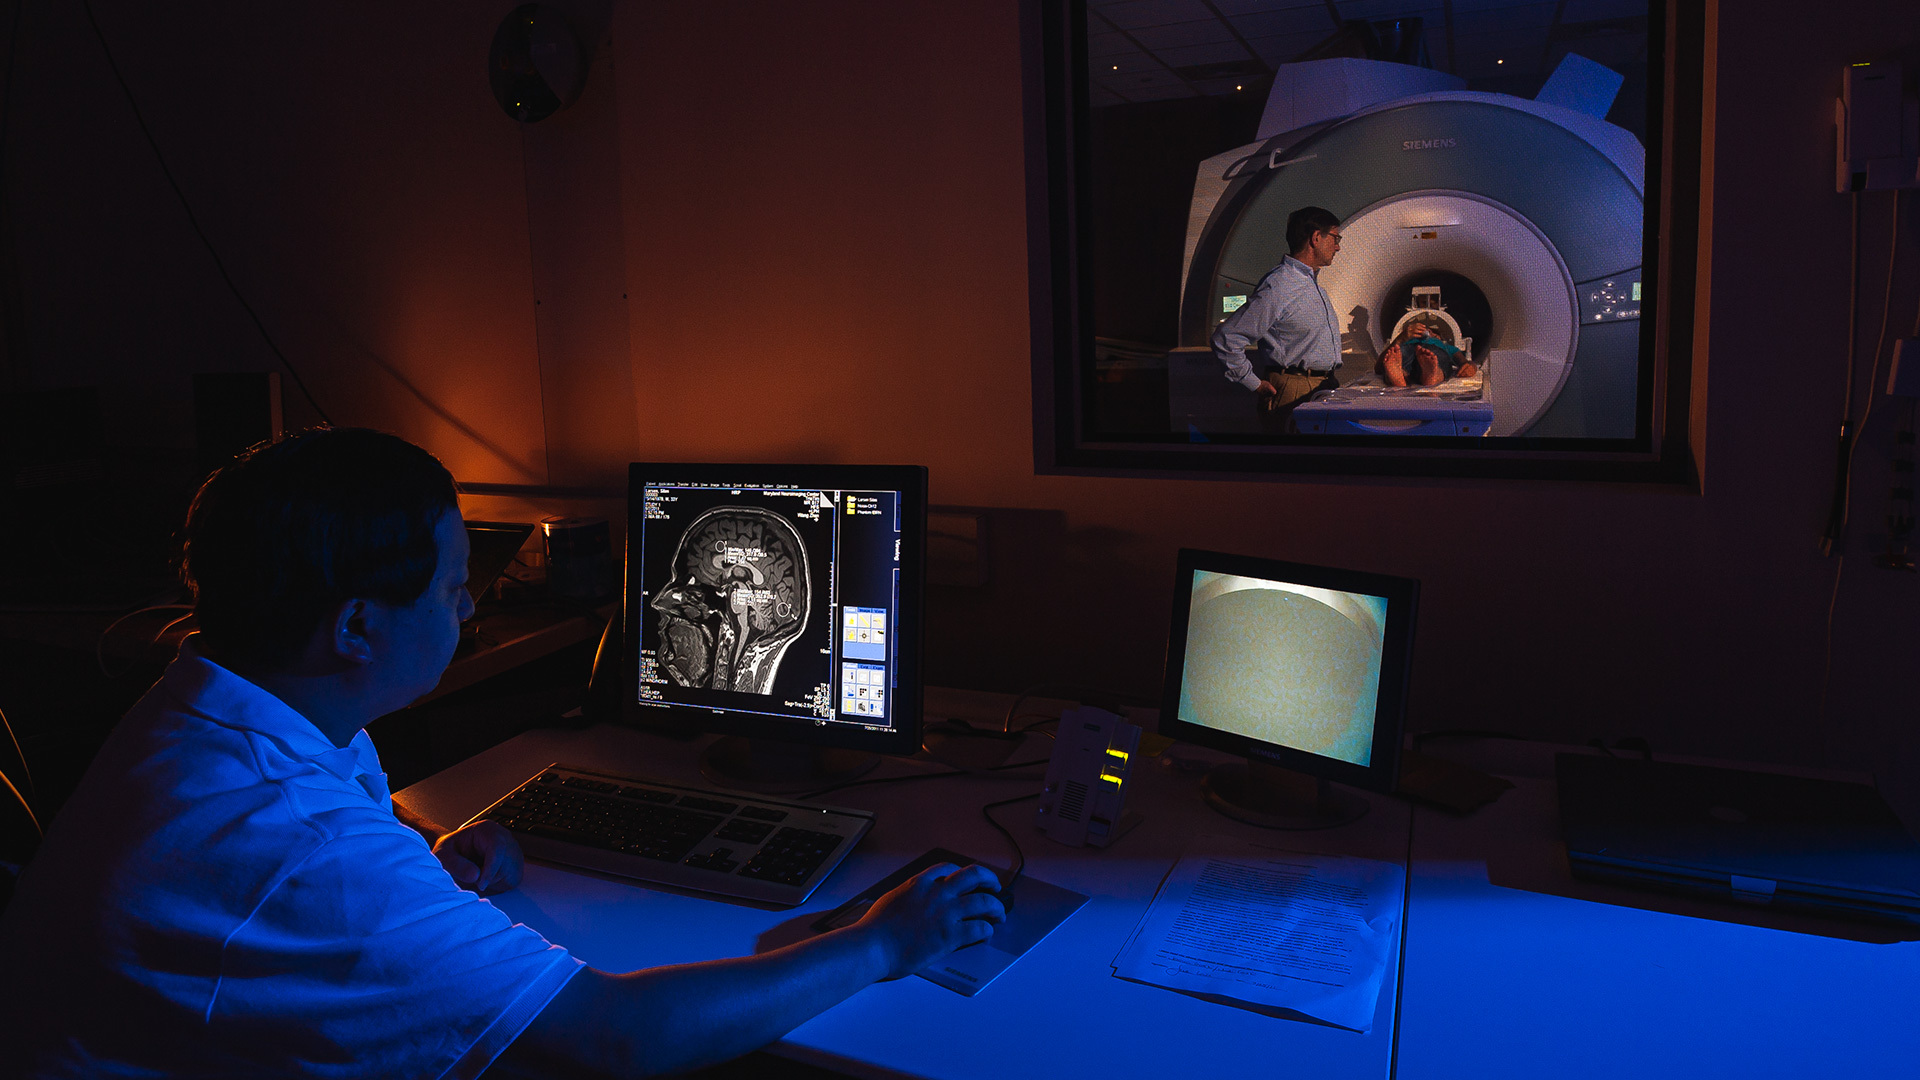 Researchers and technicians scan a patient's brain using fMRI technology at the Maryland Neuroimaging Center. Photo by John T. Consoli.